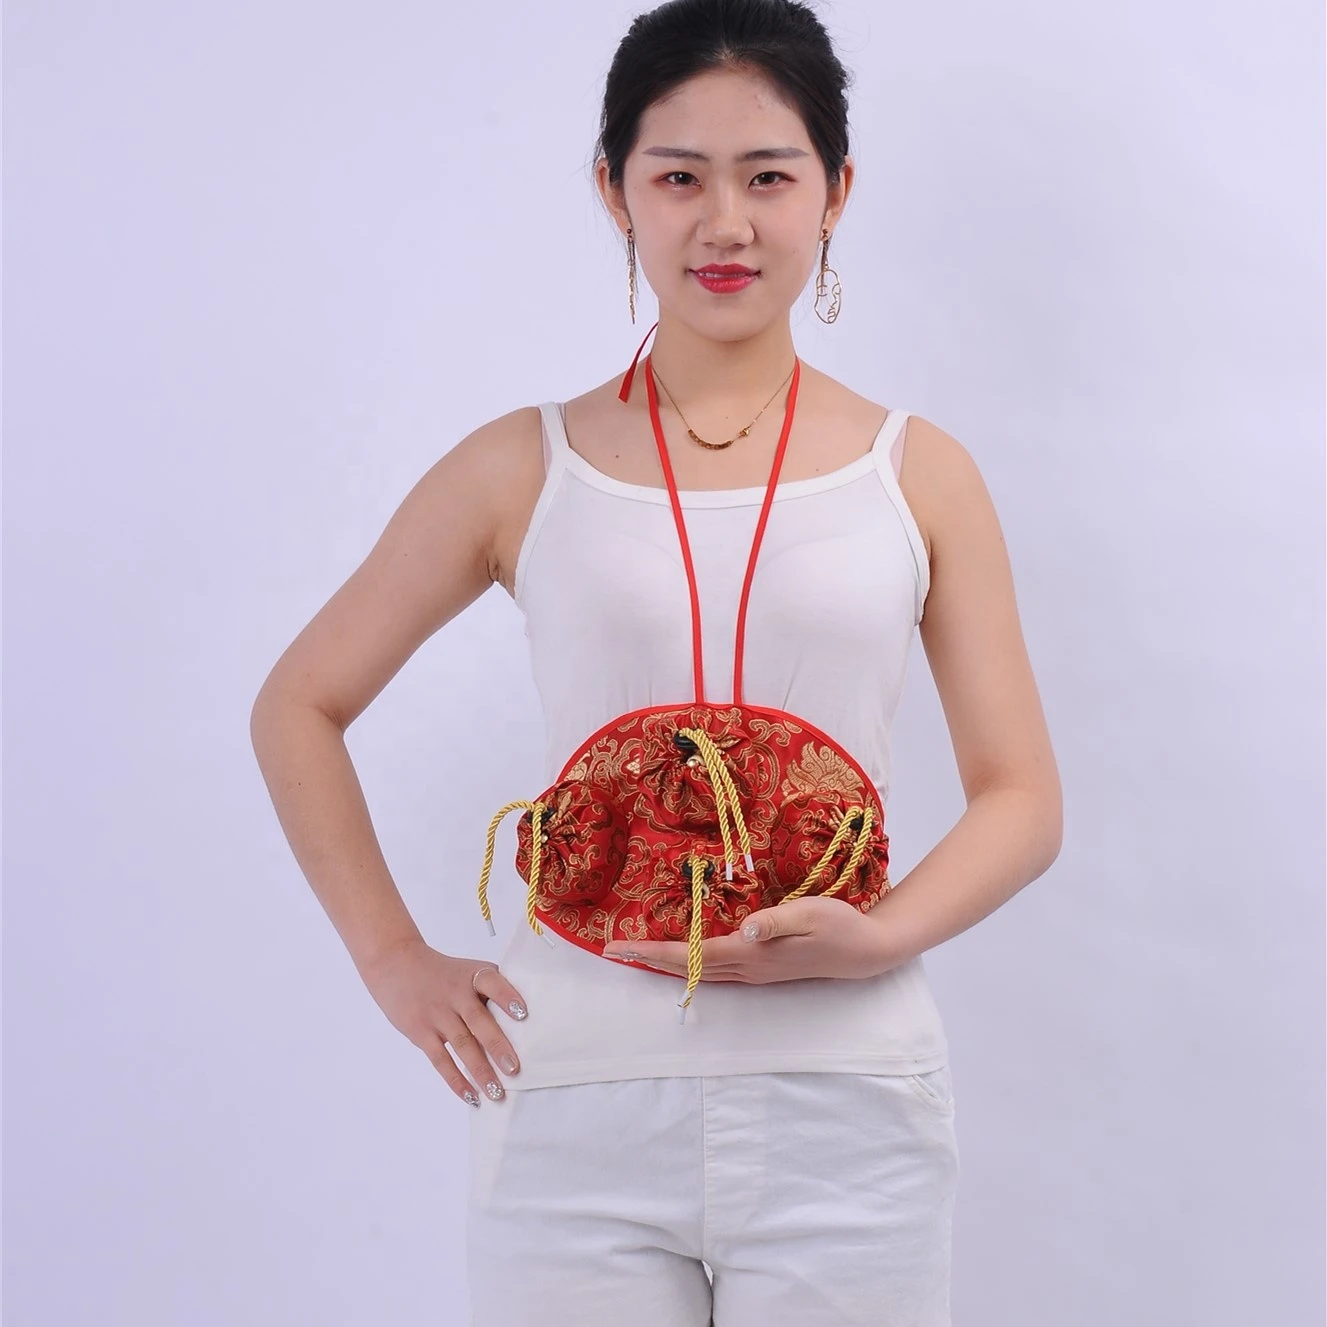 New smokeless moxibustion bag set prevents smoke from leaking